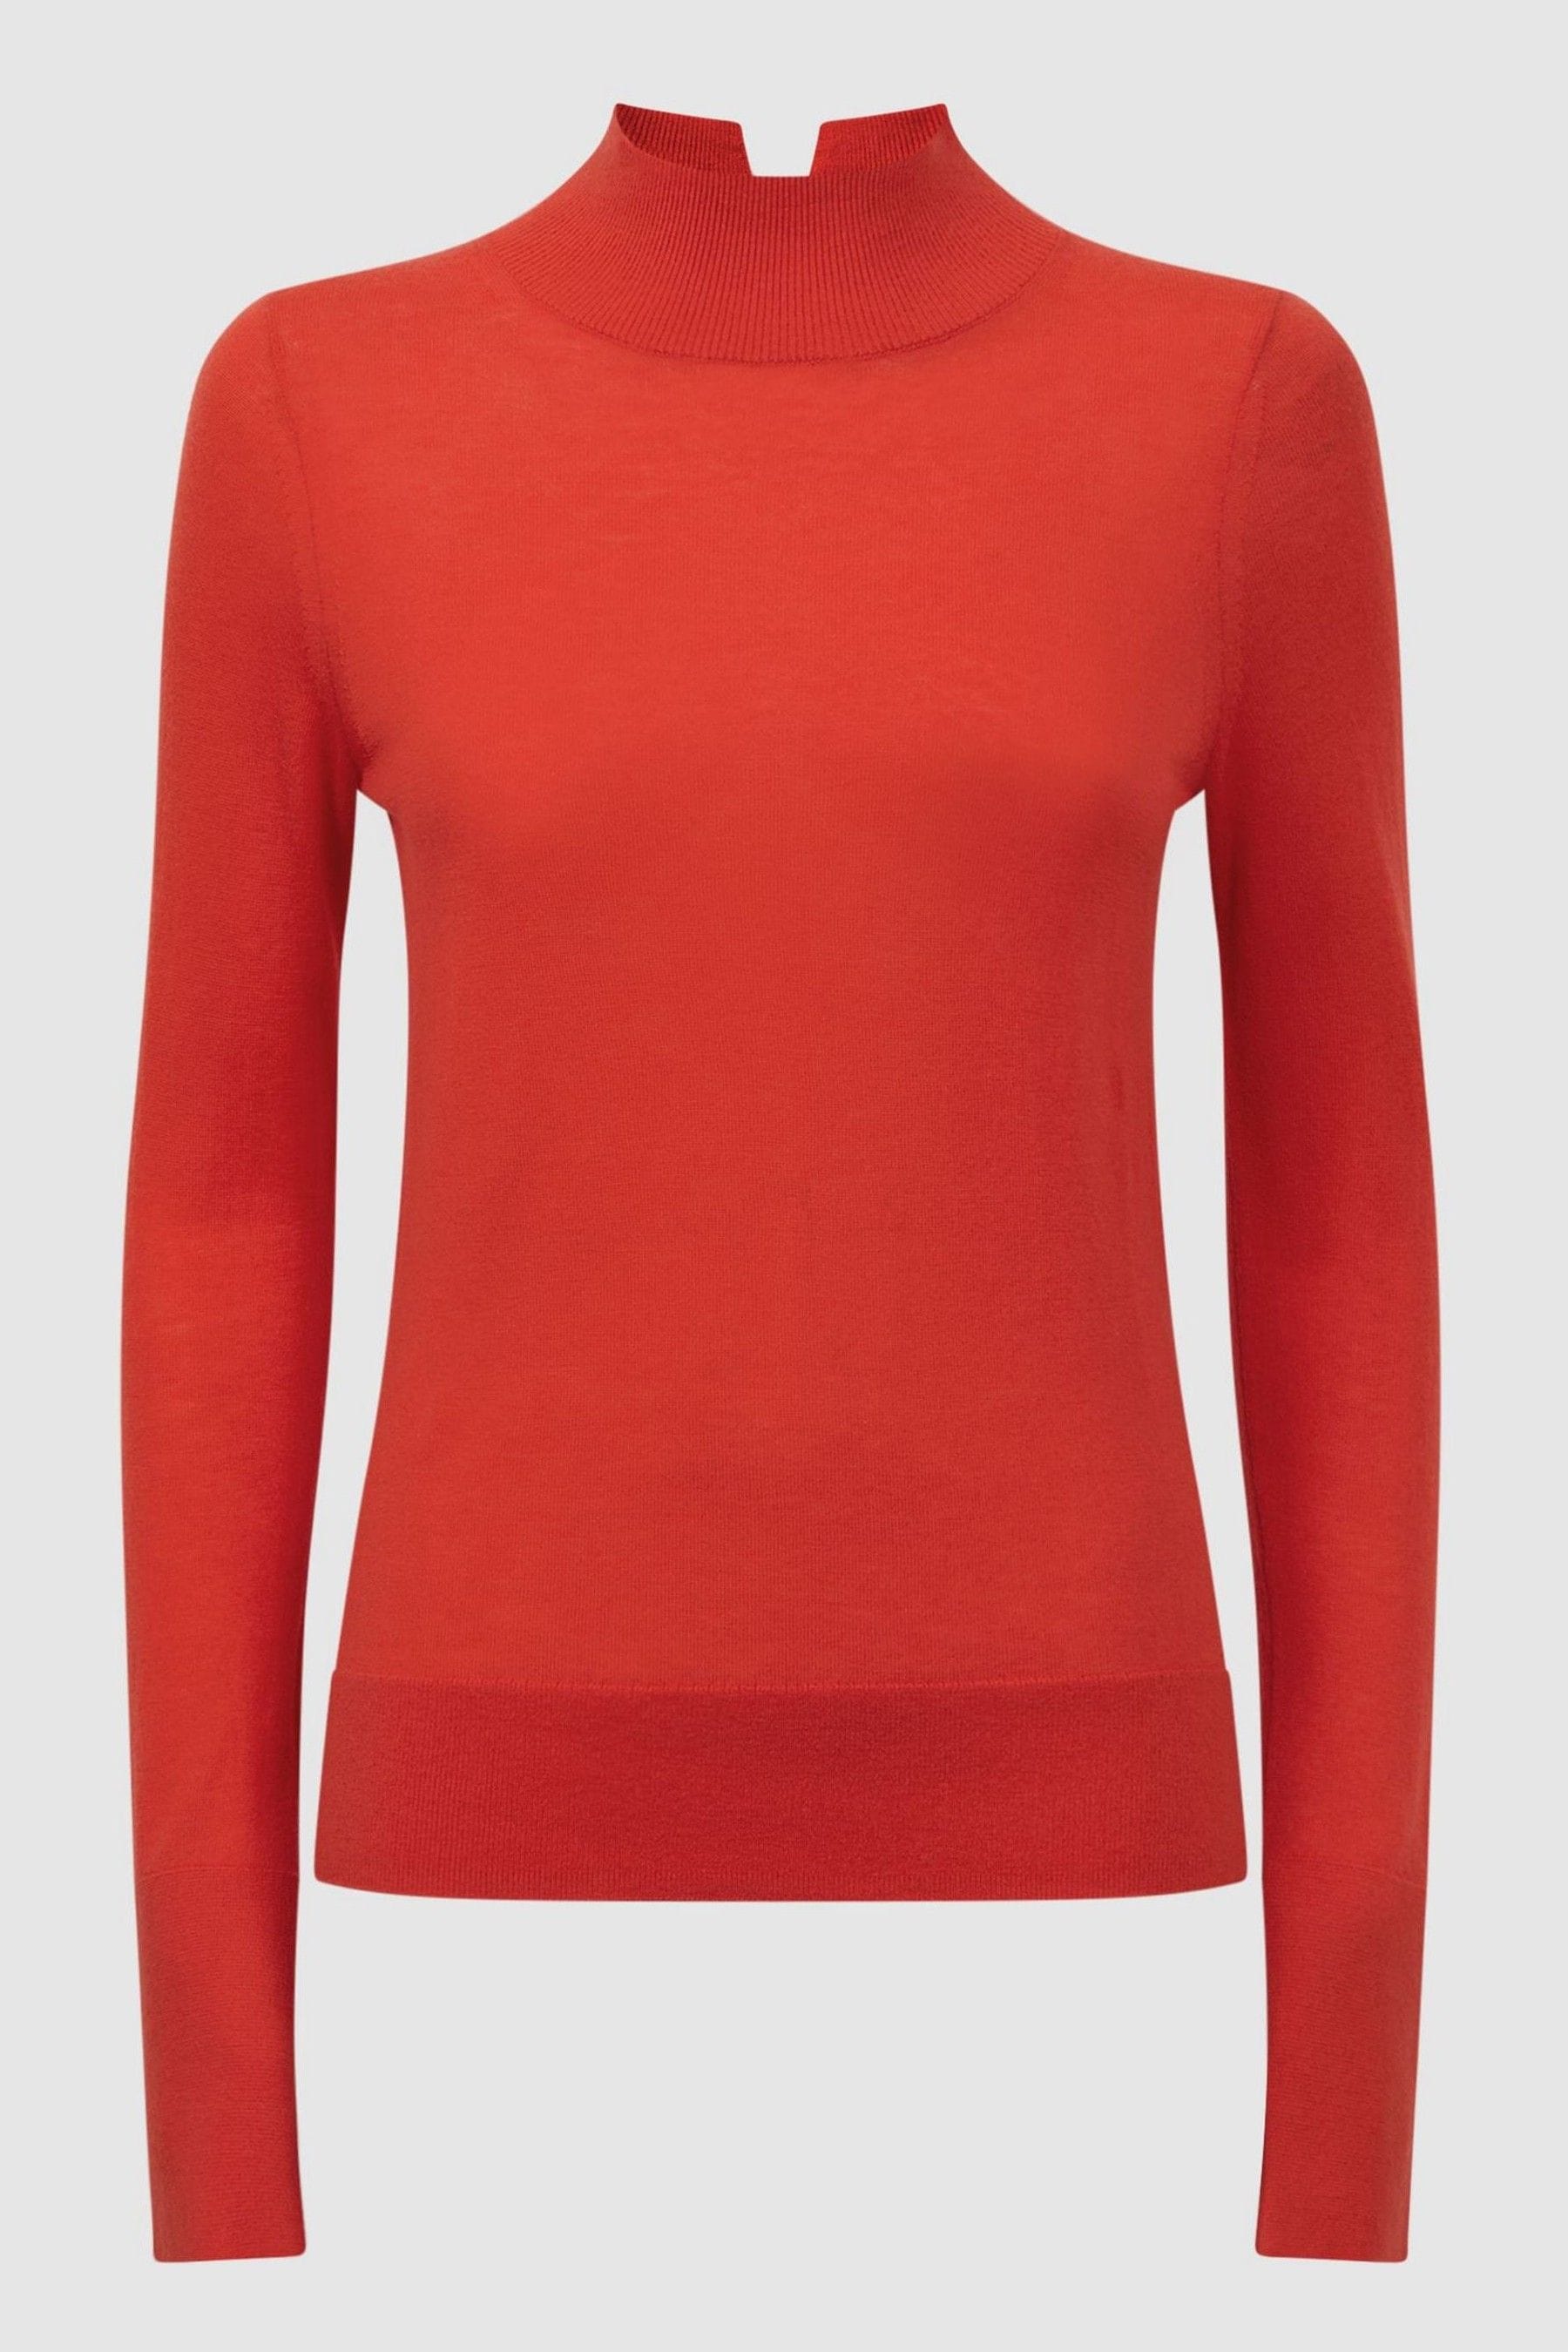 Buy Reiss Coral Kylie Merino Wool Fitted Funnel Neck Top from the Next ...